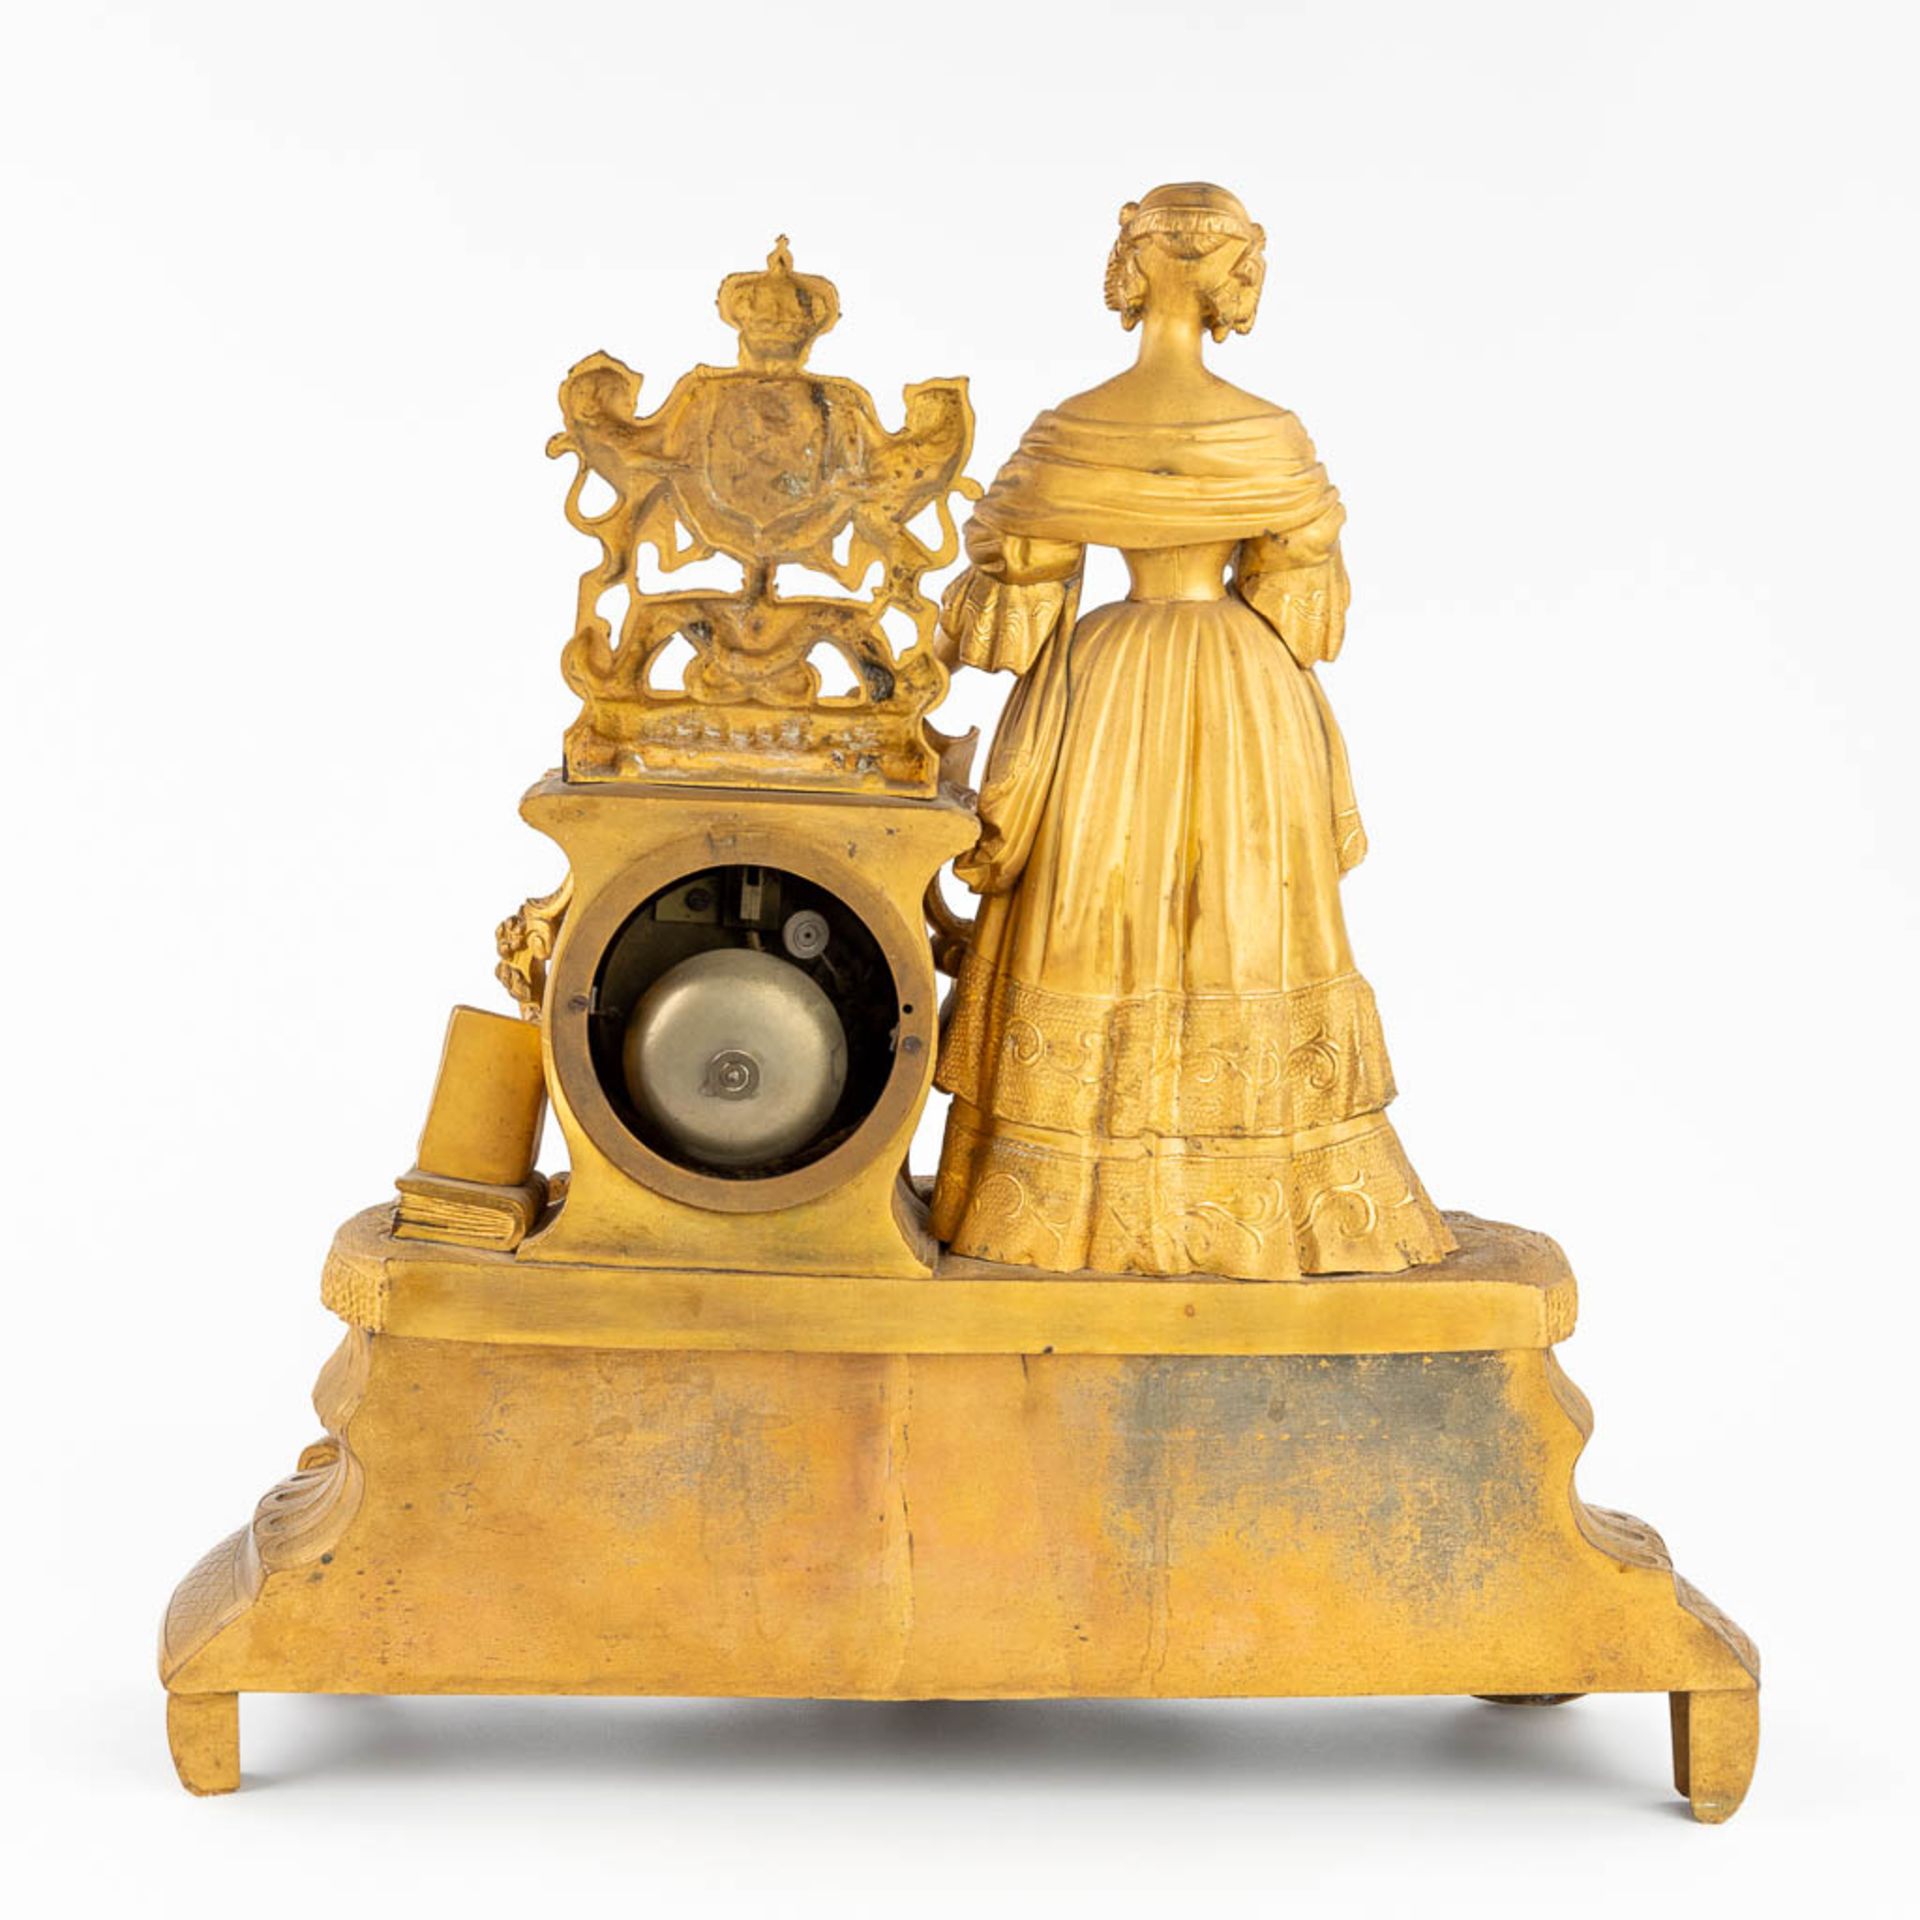 An antique mantle clock made of gilt spelter. 19th C. (44 x 45cm) - Image 4 of 16